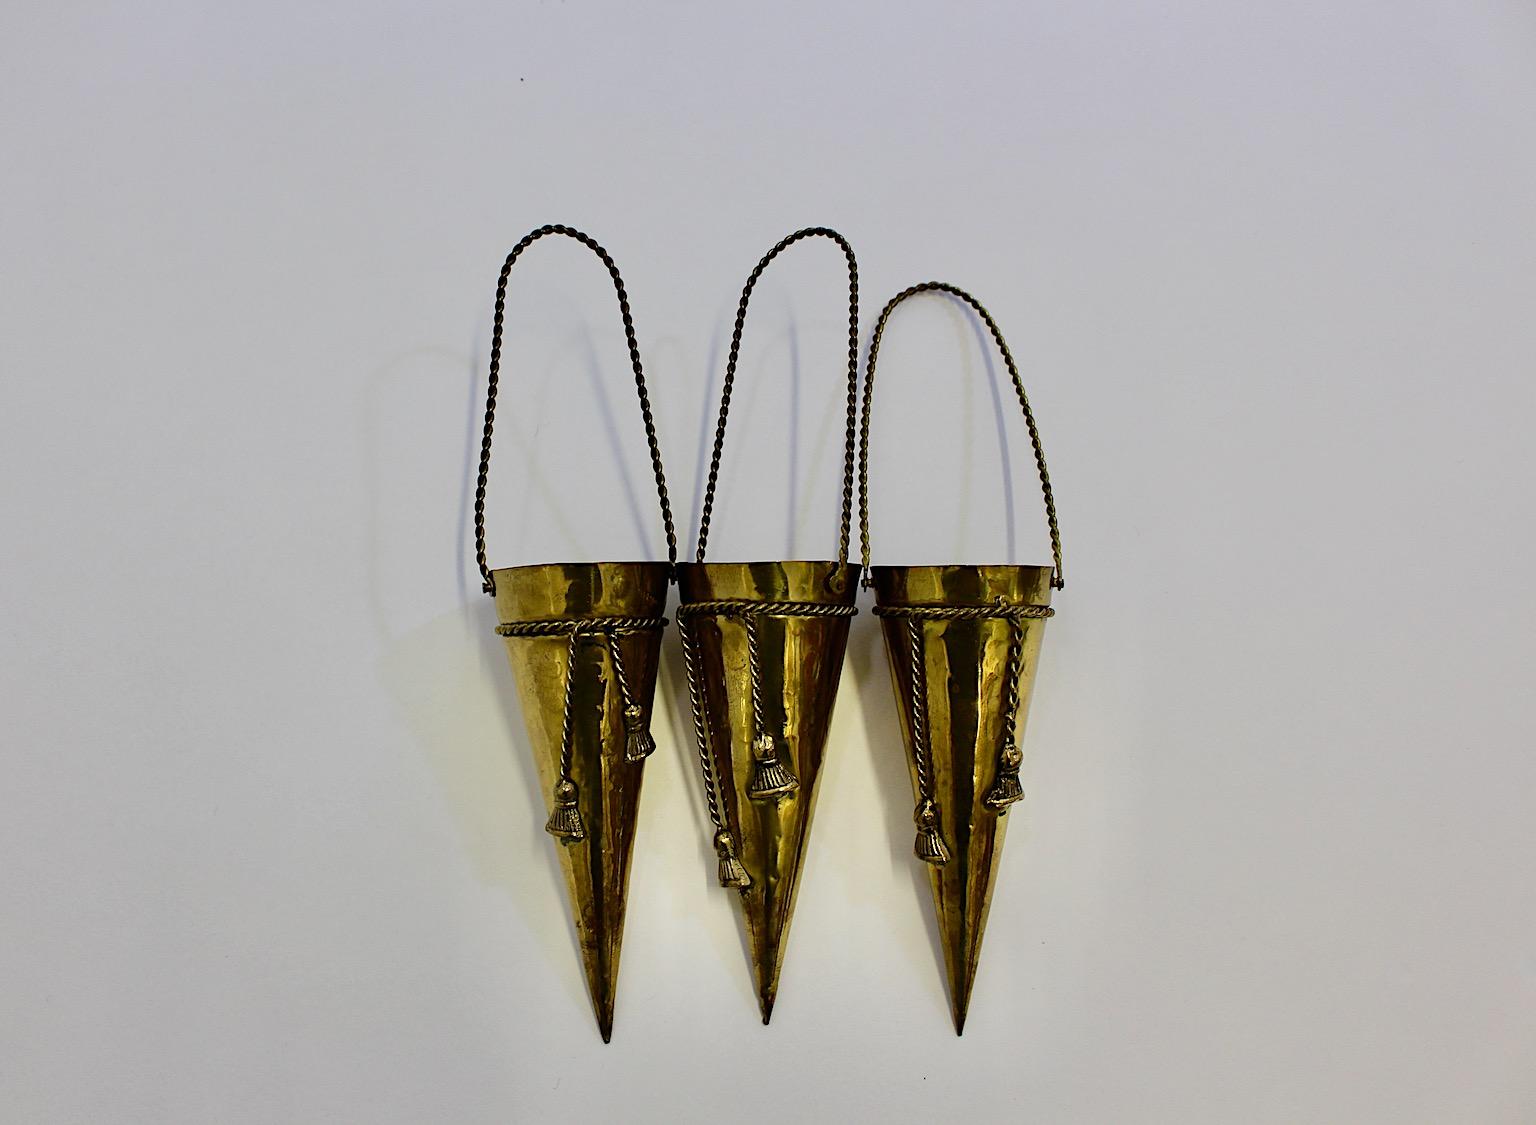 Hollywood Regency Style vintage three ( 3 ) conical wall vessels or vases from brass 1950s France.
A stunning set of three wall vessels cone like with amazing decors like brass cords and tassels amazing to present flowers in unusual way.
Easy to